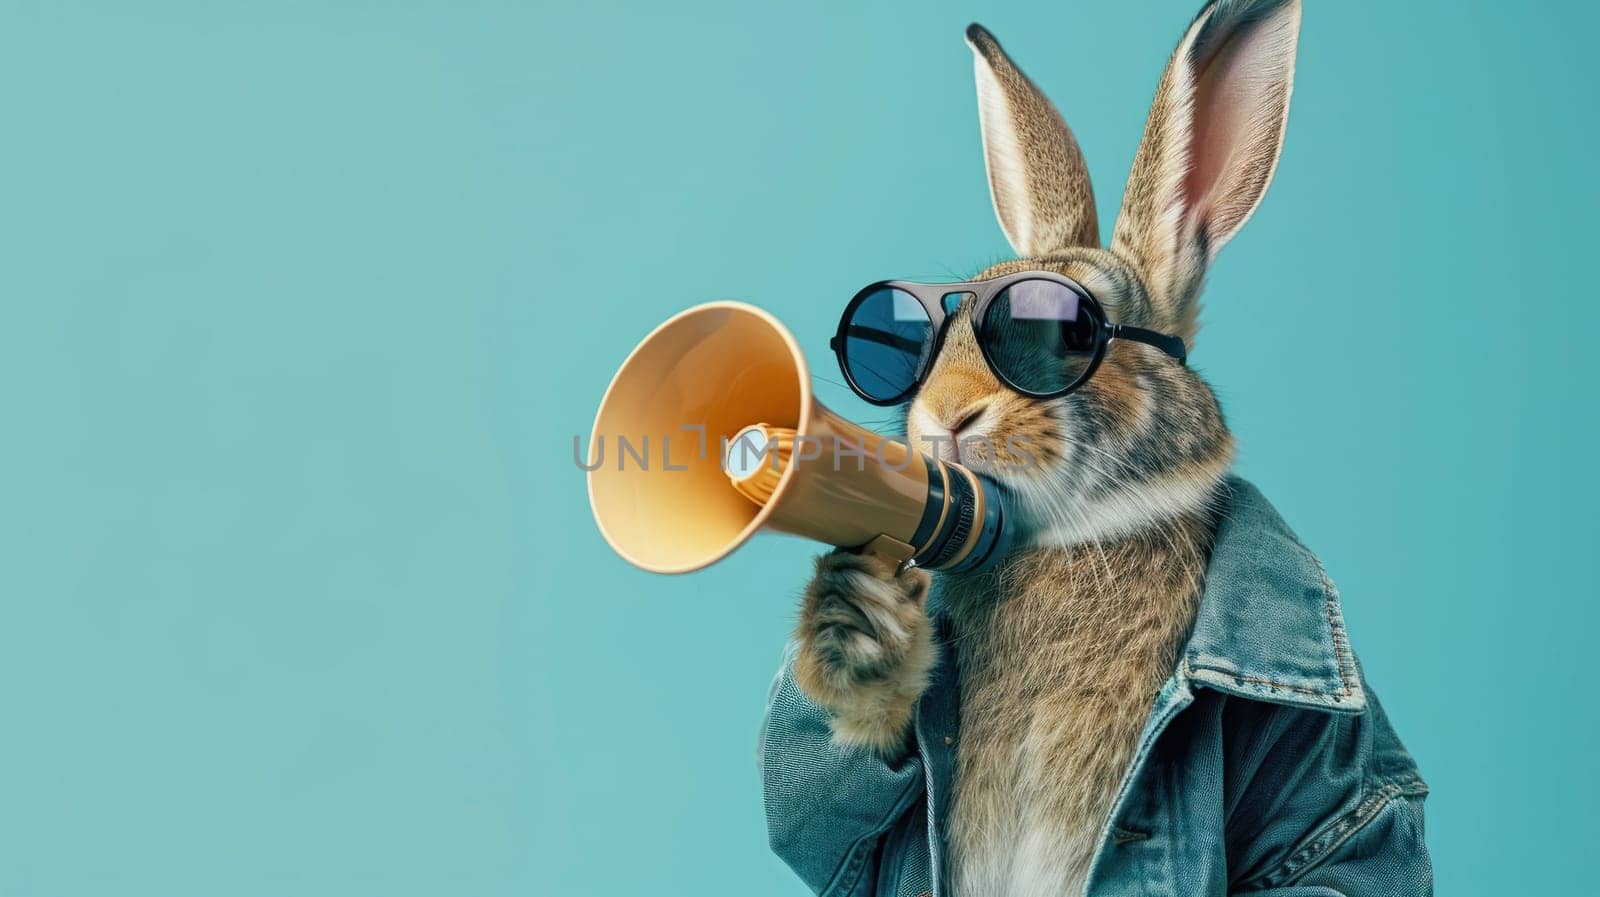 Rabbit Making Announcement with Megaphone by andreyz